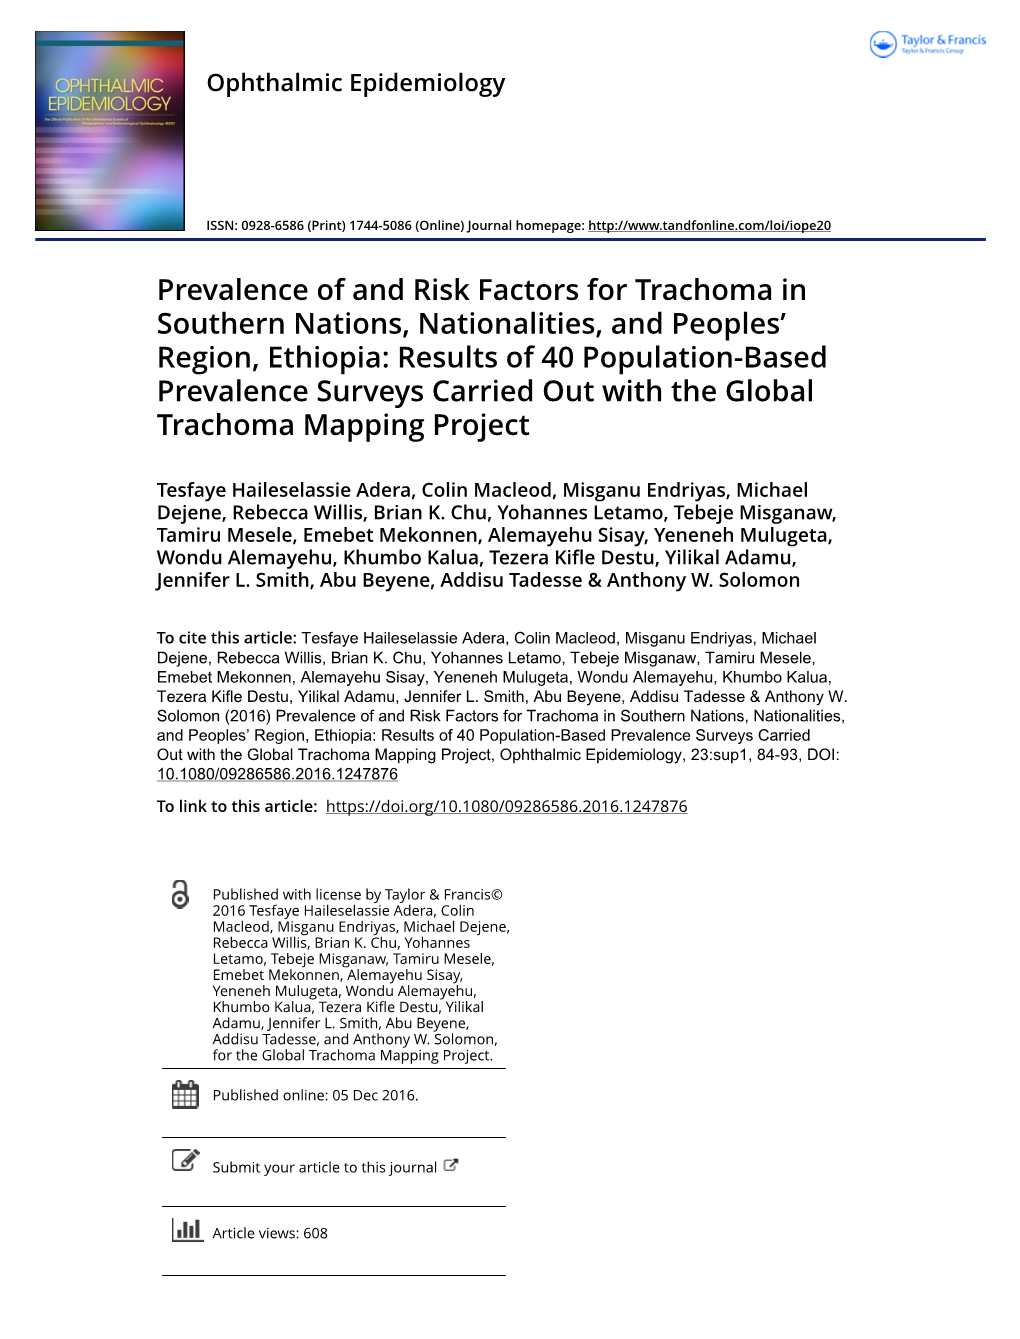 Prevalence of and Risk Factors for Trachoma in Southern Nations